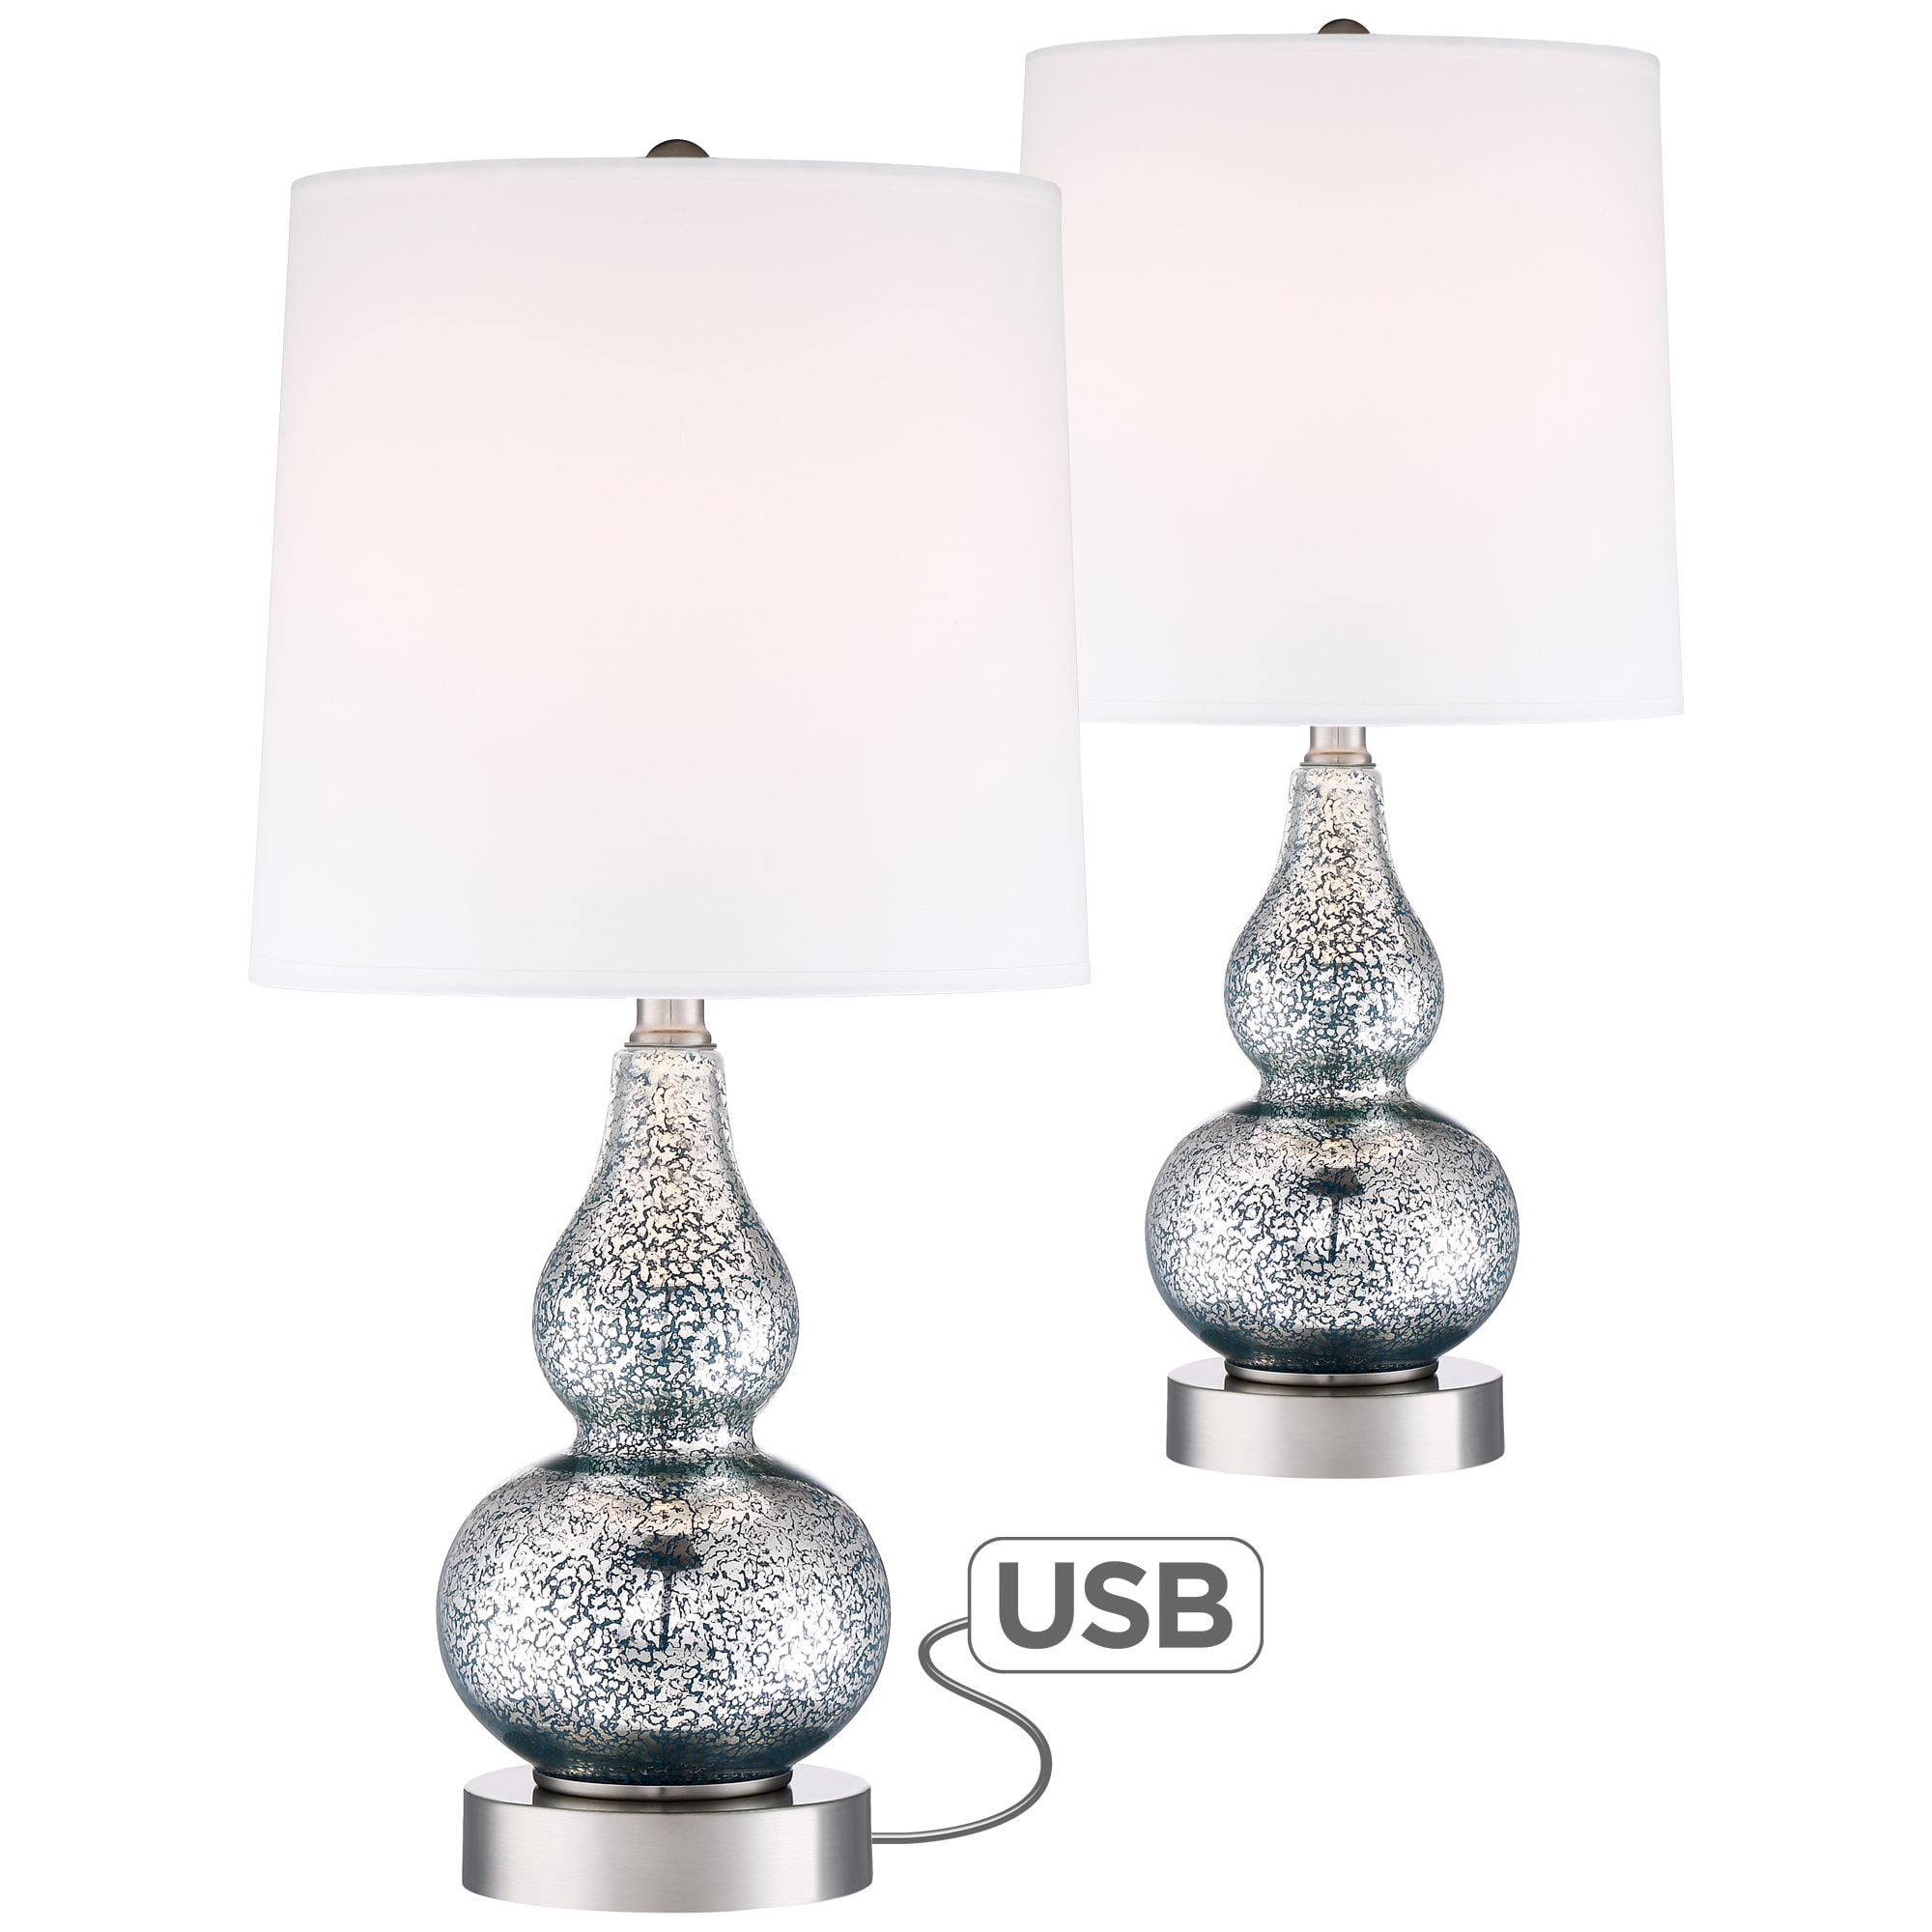 360 Lighting Modern Accent Table Lamps Set Of 2 With USB Charging